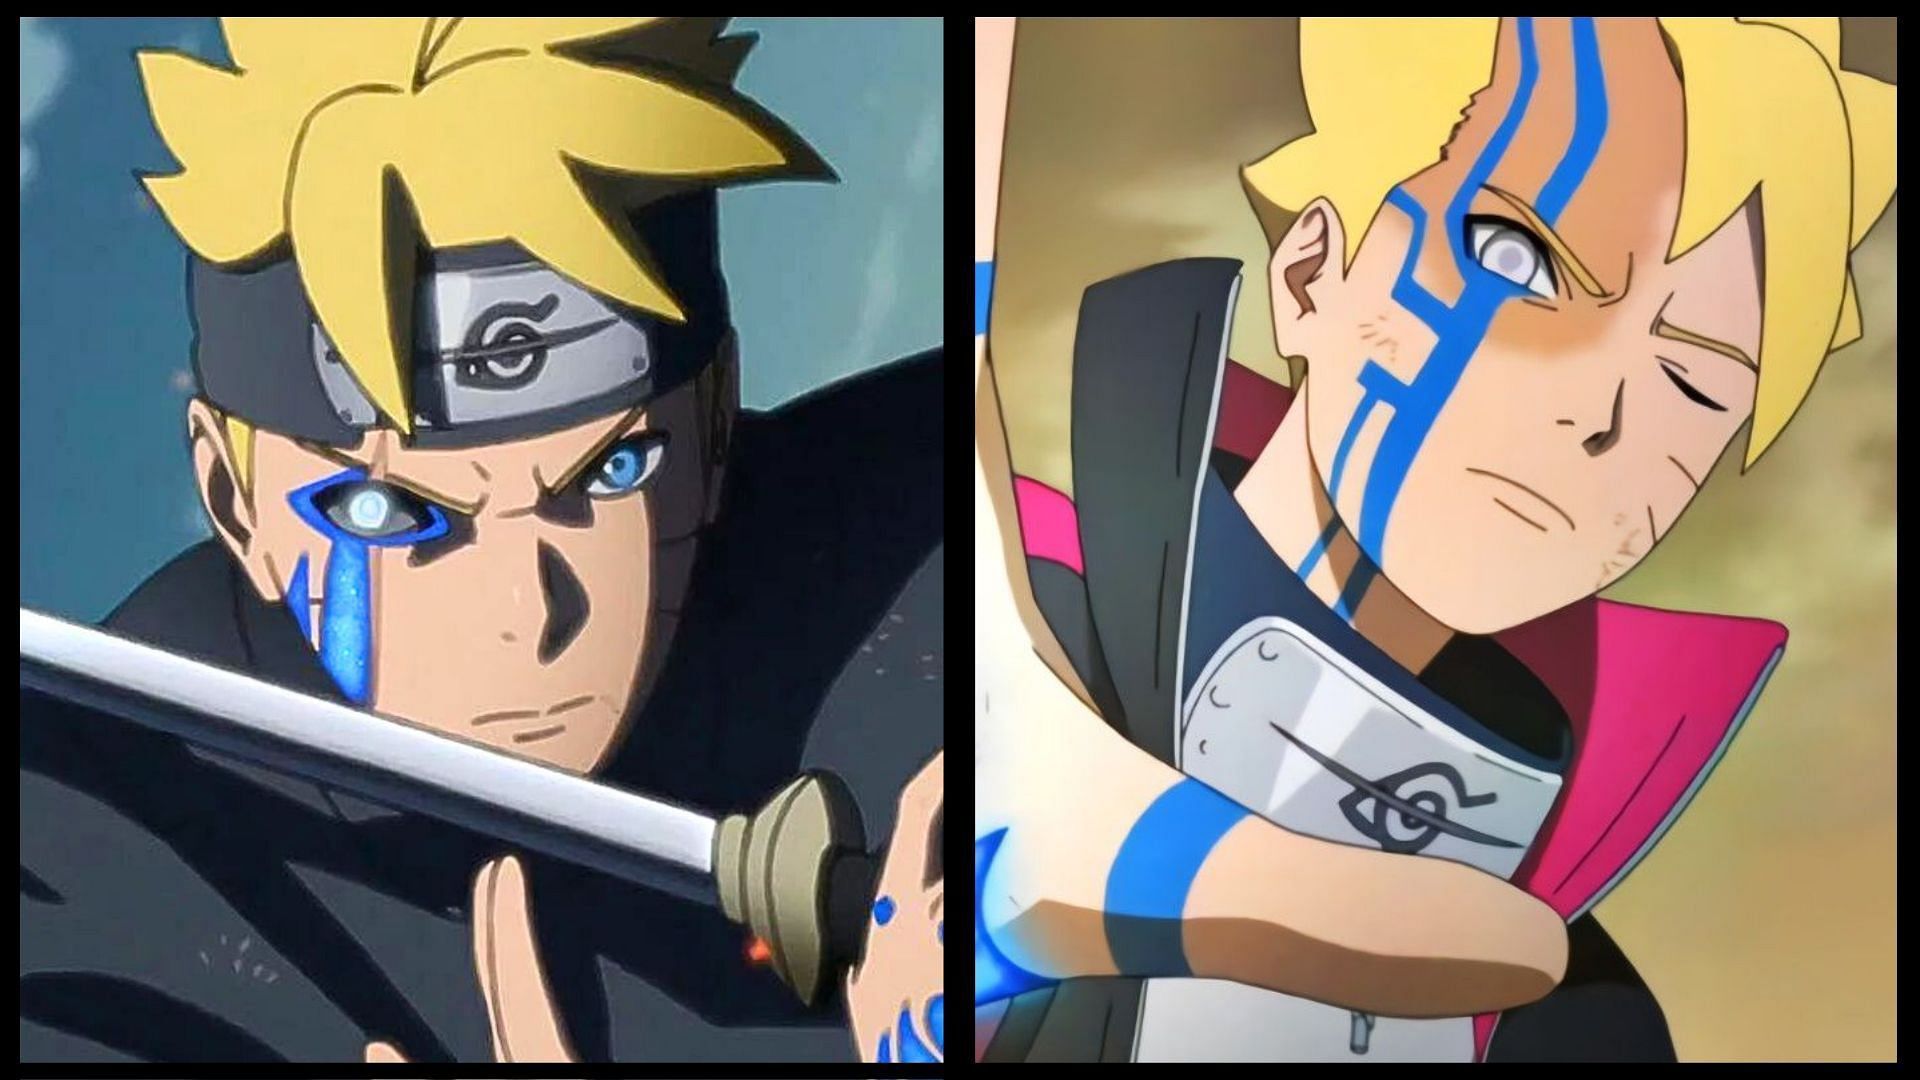 Boruto under the influence of the Karma seal as seen in the anime series (Image via Studio Pierrot)